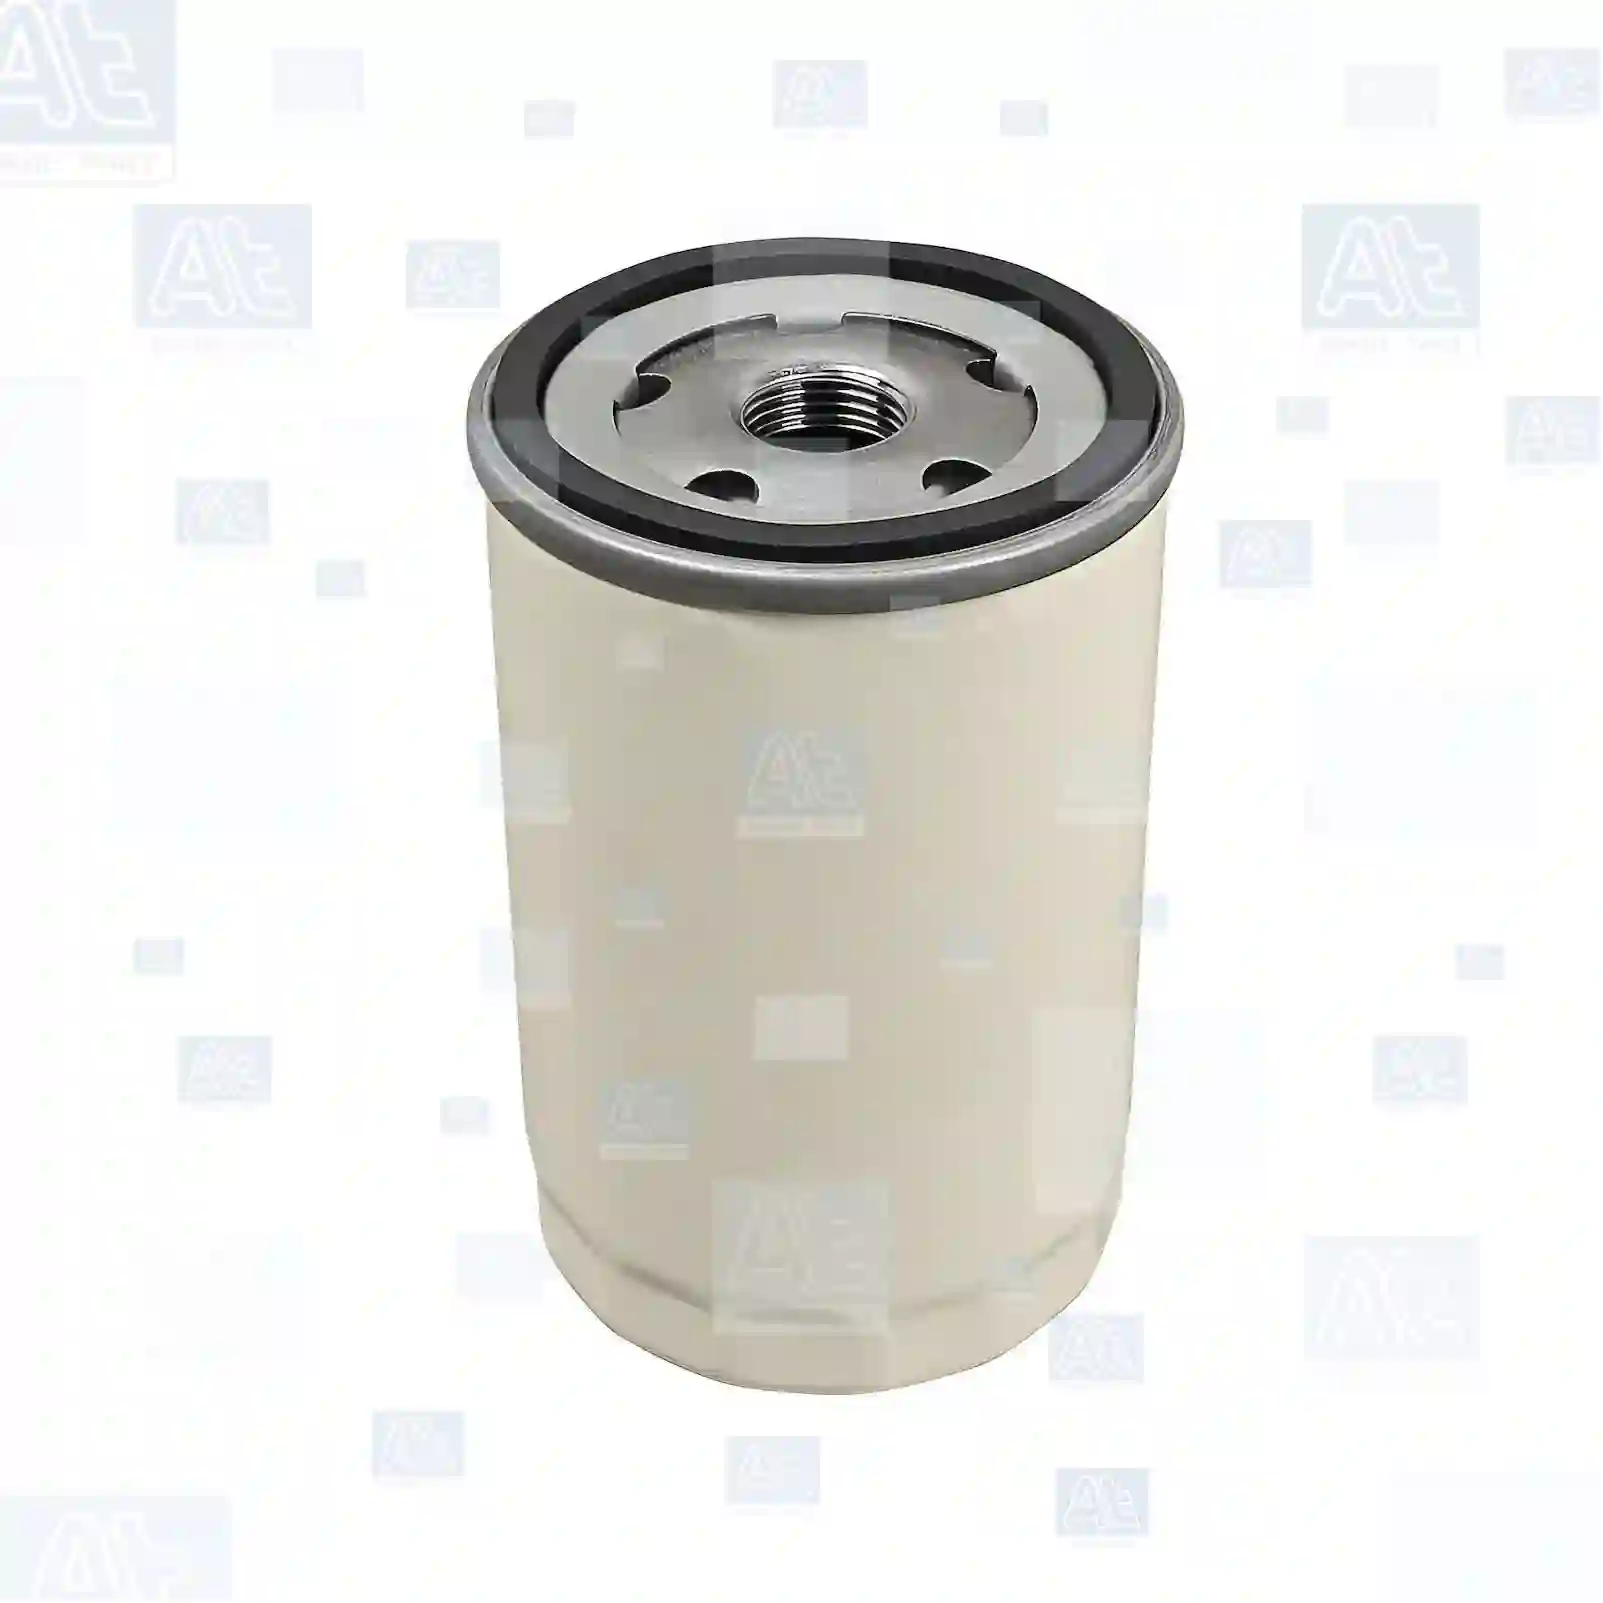 Oil filter, at no 77700696, oem no: 01FBO010, X152, 4781452AA, 4781452AB, 4781452BB, MD308302, MD353795, 4781452AA, 4781452BB, K04781452AA, 1026285, 1037678, 1043143, 1043147, 1047169, 1056613, 1066071, 1070523, 1071746, 1072434, 1097077, 1119421, 1663050, 1663051, 1667890, 3652059, 3652061, 3904728, 4454116, 5002718, 5002720, 5002721, 5002722, 5012000, 6057166, 6057167, 6066094, 6066095, 6636968, 6937010, 6937011, 978M-6714-A2A, 978M-6714-B1A, 978M-6714-B4A, YN2G-6714-B2A, 12490234, 25171947, 25322830, 2532411, 9975153, 4781452AA, 4781452BB, K04781452AA, TY22047, 4454116, BBU2994, ERR0681, ERR1168, ERR3340, ETC4953, ETC6519, ETC6599, HKJ2208, 1E0514302B, C60114302, C601143X2A, YF0914302, ZZM123802, ZZM123802A, MD353795, 2654412, 26110500, 35129000, 3577847, 75046821 At Spare Part | Engine, Accelerator Pedal, Camshaft, Connecting Rod, Crankcase, Crankshaft, Cylinder Head, Engine Suspension Mountings, Exhaust Manifold, Exhaust Gas Recirculation, Filter Kits, Flywheel Housing, General Overhaul Kits, Engine, Intake Manifold, Oil Cleaner, Oil Cooler, Oil Filter, Oil Pump, Oil Sump, Piston & Liner, Sensor & Switch, Timing Case, Turbocharger, Cooling System, Belt Tensioner, Coolant Filter, Coolant Pipe, Corrosion Prevention Agent, Drive, Expansion Tank, Fan, Intercooler, Monitors & Gauges, Radiator, Thermostat, V-Belt / Timing belt, Water Pump, Fuel System, Electronical Injector Unit, Feed Pump, Fuel Filter, cpl., Fuel Gauge Sender,  Fuel Line, Fuel Pump, Fuel Tank, Injection Line Kit, Injection Pump, Exhaust System, Clutch & Pedal, Gearbox, Propeller Shaft, Axles, Brake System, Hubs & Wheels, Suspension, Leaf Spring, Universal Parts / Accessories, Steering, Electrical System, Cabin Oil filter, at no 77700696, oem no: 01FBO010, X152, 4781452AA, 4781452AB, 4781452BB, MD308302, MD353795, 4781452AA, 4781452BB, K04781452AA, 1026285, 1037678, 1043143, 1043147, 1047169, 1056613, 1066071, 1070523, 1071746, 1072434, 1097077, 1119421, 1663050, 1663051, 1667890, 3652059, 3652061, 3904728, 4454116, 5002718, 5002720, 5002721, 5002722, 5012000, 6057166, 6057167, 6066094, 6066095, 6636968, 6937010, 6937011, 978M-6714-A2A, 978M-6714-B1A, 978M-6714-B4A, YN2G-6714-B2A, 12490234, 25171947, 25322830, 2532411, 9975153, 4781452AA, 4781452BB, K04781452AA, TY22047, 4454116, BBU2994, ERR0681, ERR1168, ERR3340, ETC4953, ETC6519, ETC6599, HKJ2208, 1E0514302B, C60114302, C601143X2A, YF0914302, ZZM123802, ZZM123802A, MD353795, 2654412, 26110500, 35129000, 3577847, 75046821 At Spare Part | Engine, Accelerator Pedal, Camshaft, Connecting Rod, Crankcase, Crankshaft, Cylinder Head, Engine Suspension Mountings, Exhaust Manifold, Exhaust Gas Recirculation, Filter Kits, Flywheel Housing, General Overhaul Kits, Engine, Intake Manifold, Oil Cleaner, Oil Cooler, Oil Filter, Oil Pump, Oil Sump, Piston & Liner, Sensor & Switch, Timing Case, Turbocharger, Cooling System, Belt Tensioner, Coolant Filter, Coolant Pipe, Corrosion Prevention Agent, Drive, Expansion Tank, Fan, Intercooler, Monitors & Gauges, Radiator, Thermostat, V-Belt / Timing belt, Water Pump, Fuel System, Electronical Injector Unit, Feed Pump, Fuel Filter, cpl., Fuel Gauge Sender,  Fuel Line, Fuel Pump, Fuel Tank, Injection Line Kit, Injection Pump, Exhaust System, Clutch & Pedal, Gearbox, Propeller Shaft, Axles, Brake System, Hubs & Wheels, Suspension, Leaf Spring, Universal Parts / Accessories, Steering, Electrical System, Cabin